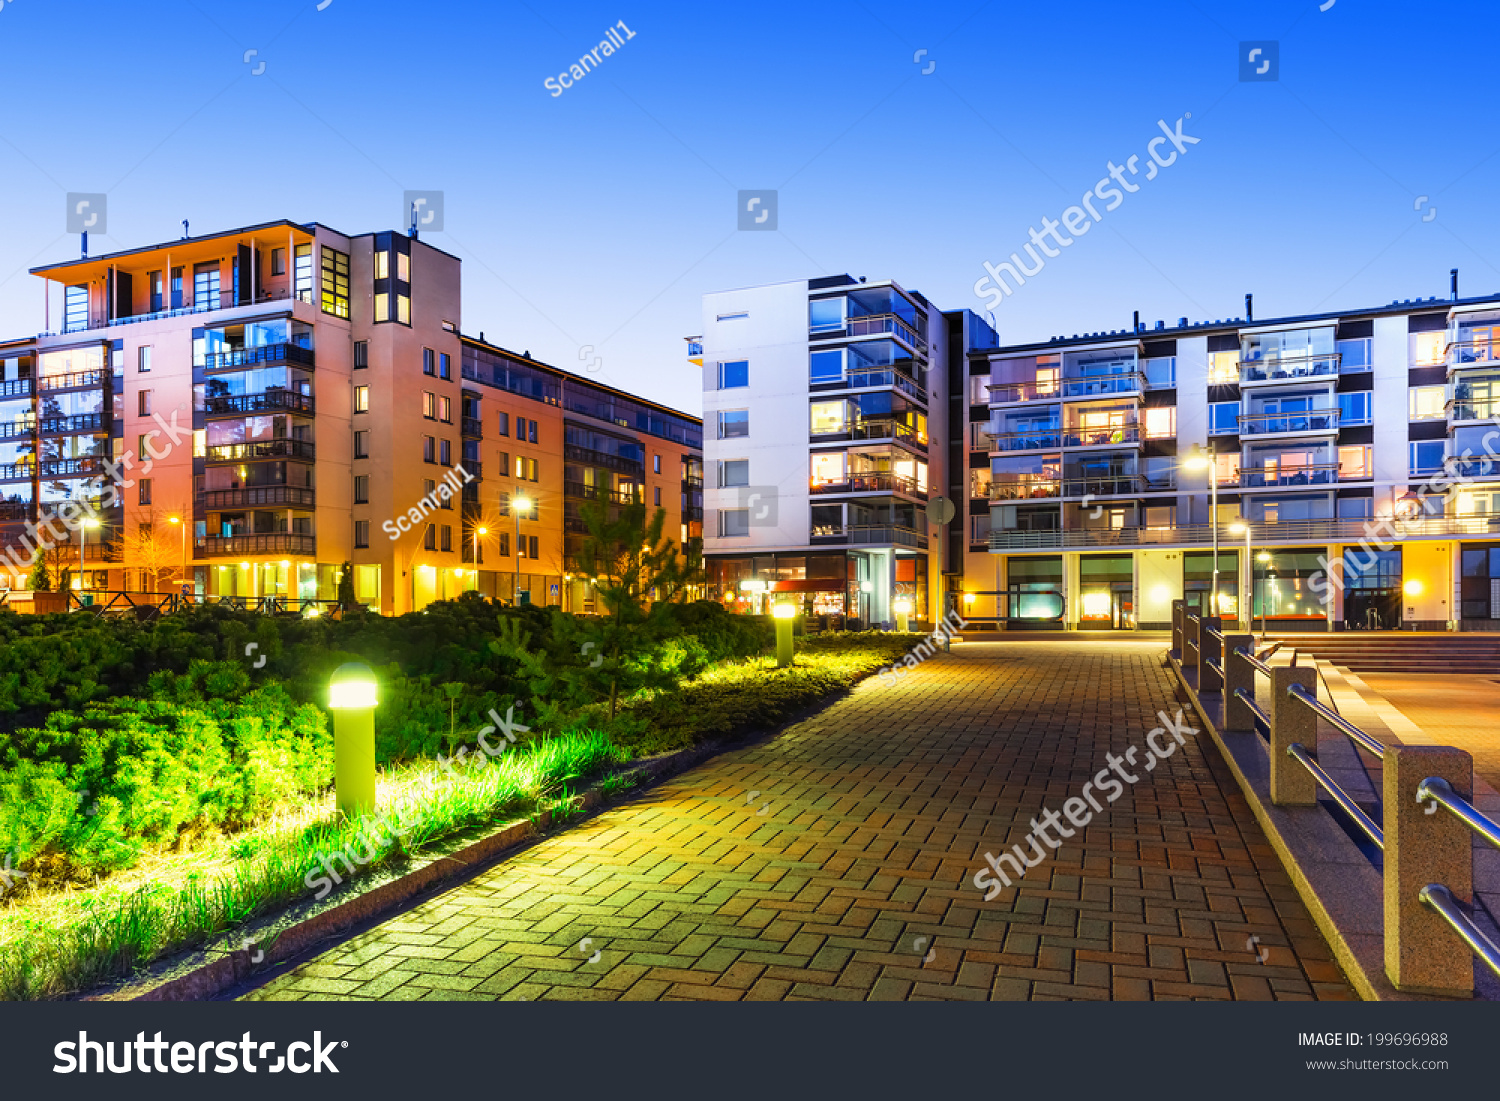 House building and city construction concept: evening outdoor urban view of modern real estate homes #199696988